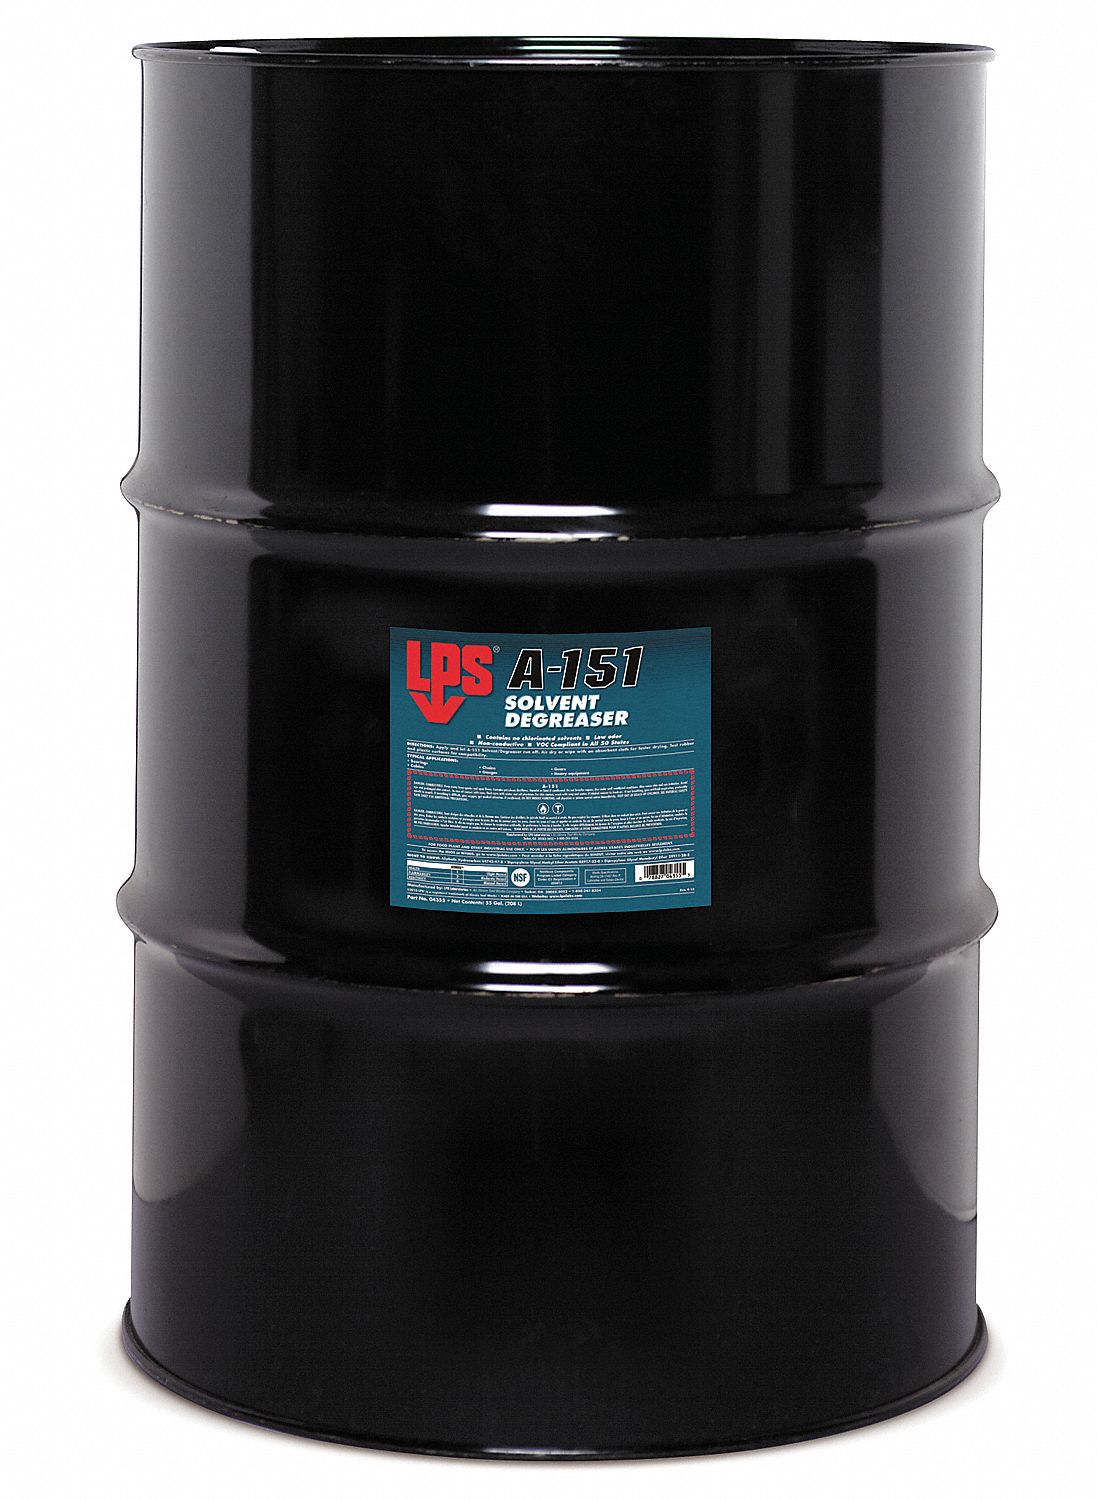 20Y629 - A-151 Degreaser 55 gal. Characteristic